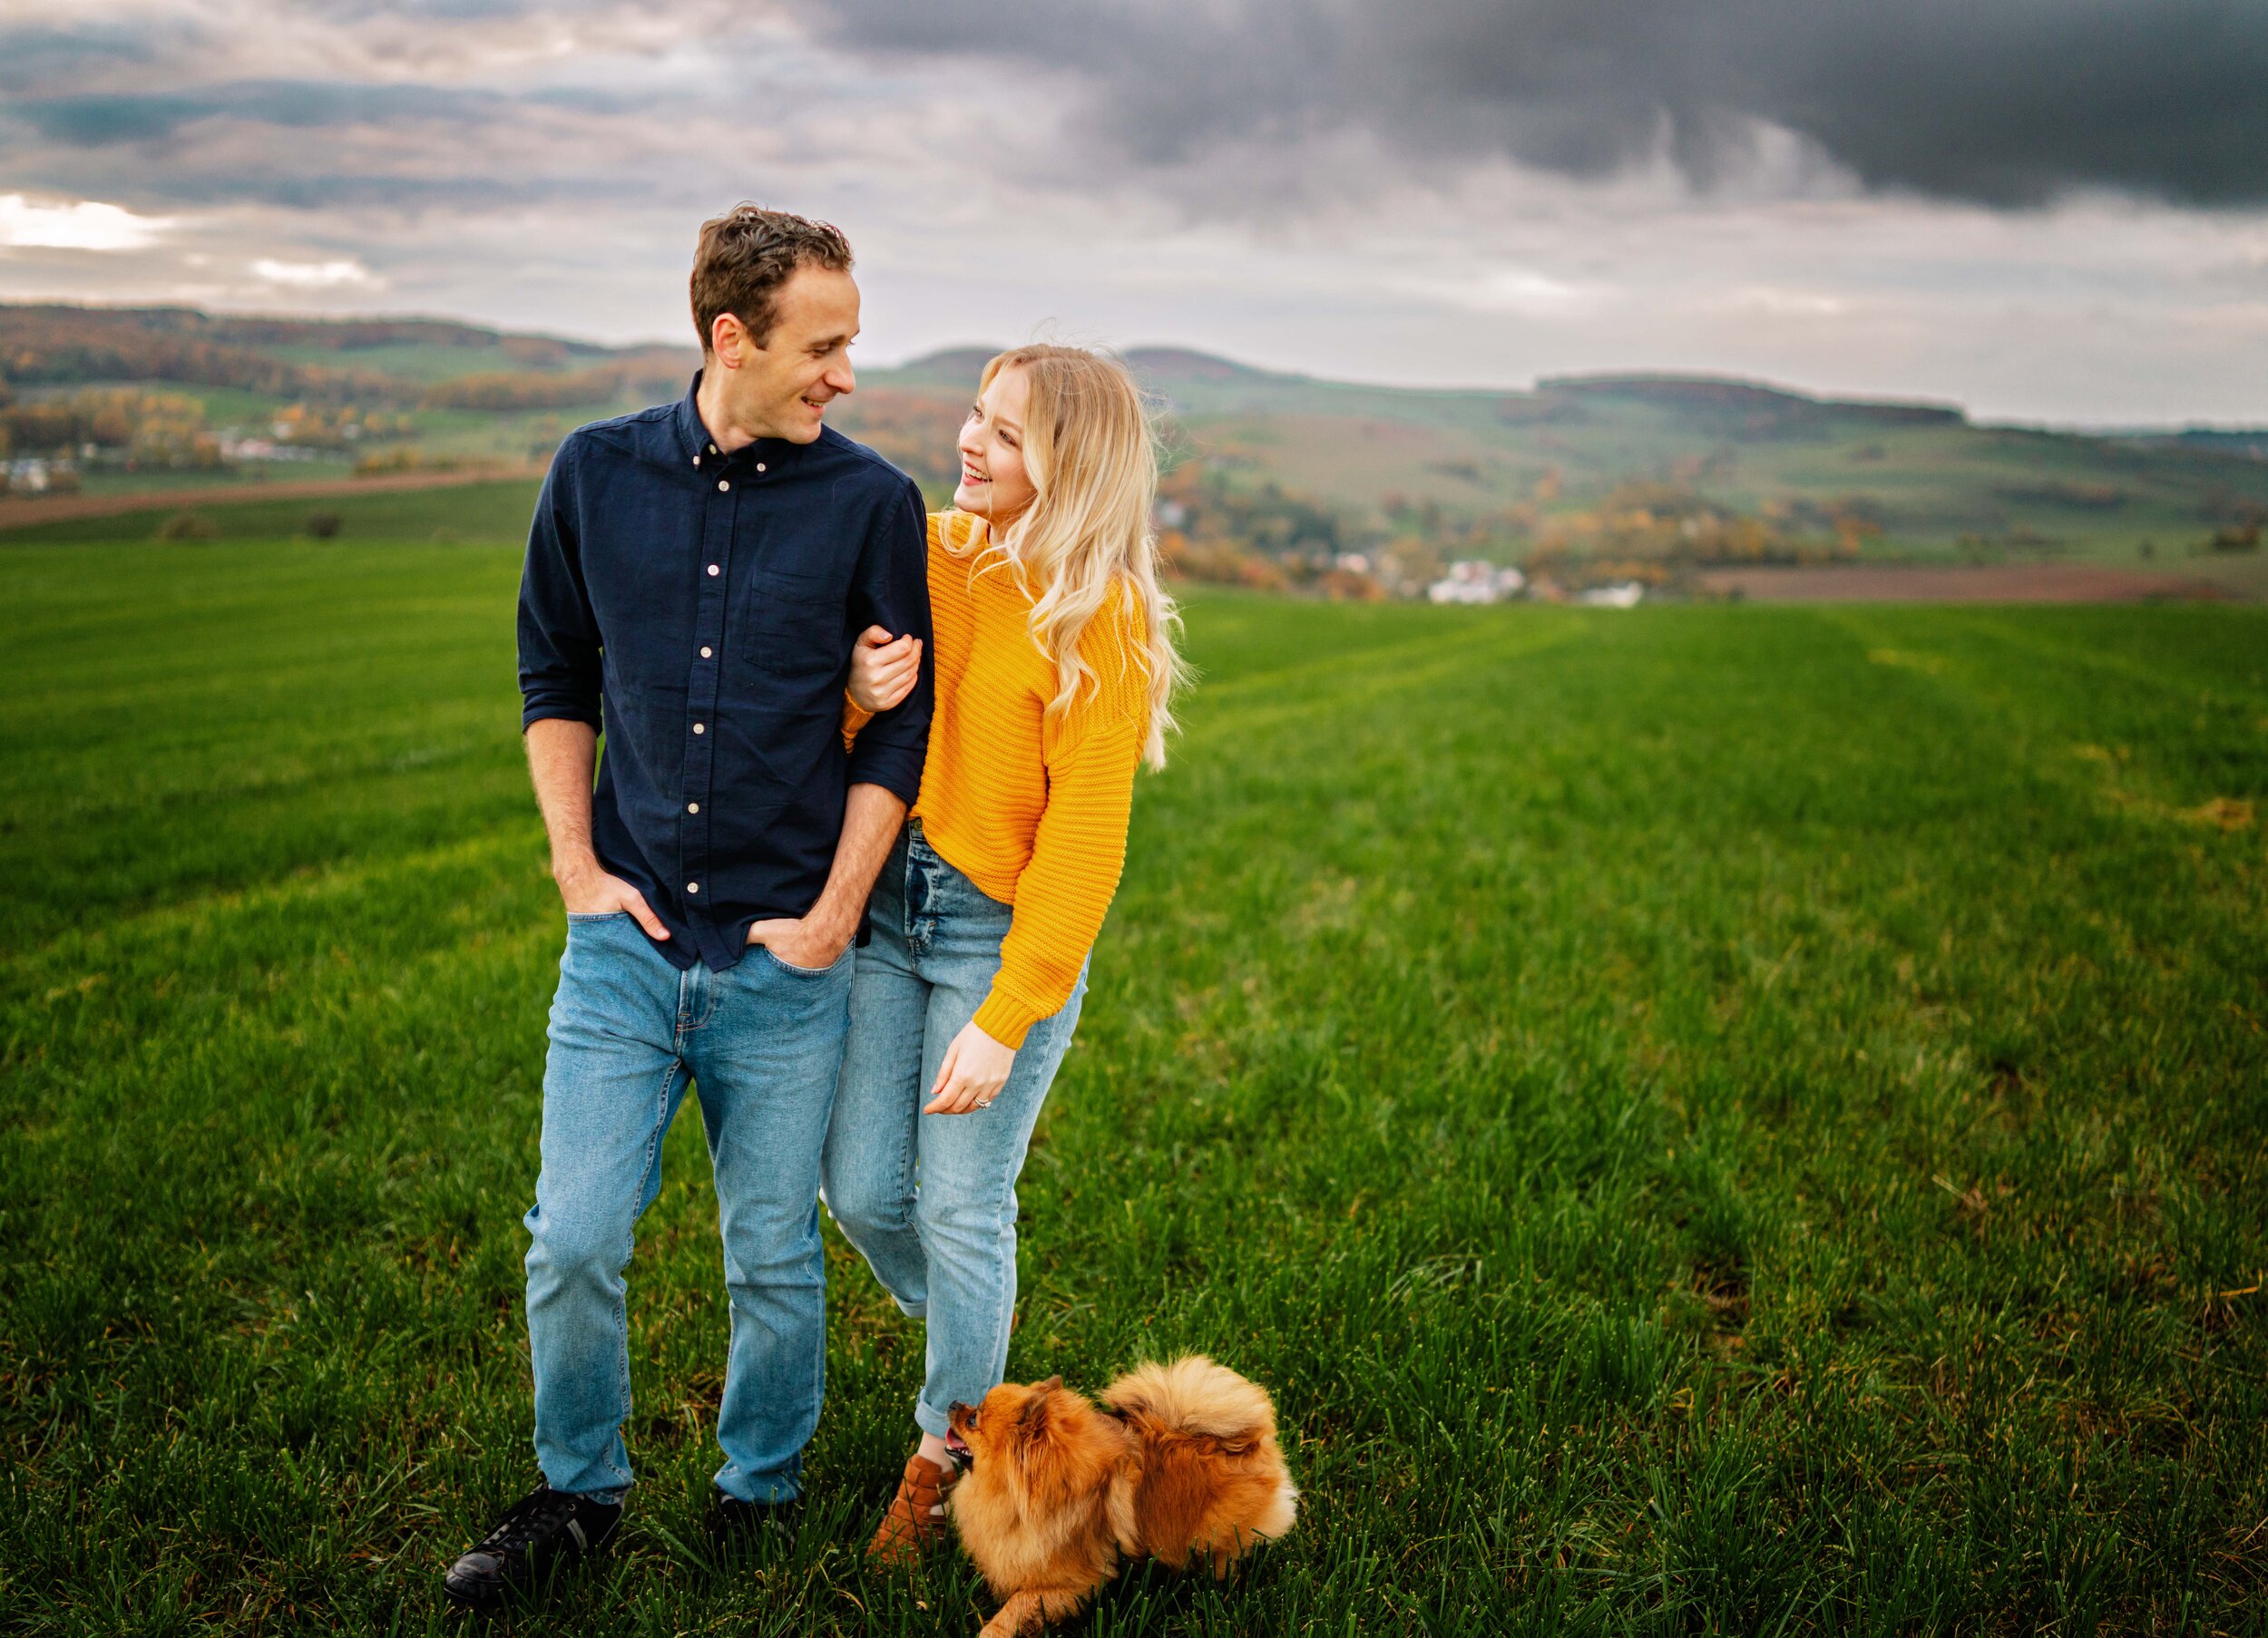  engagement session with young couple and pomeranian dogs in green fields in Ramstein Germany by family photographer sarah Havens    Paarshooting mit jungem Pärchen und Hunden in der Feldern bei Kaiserslautern, Rheinland-Pfalz im Herbst 